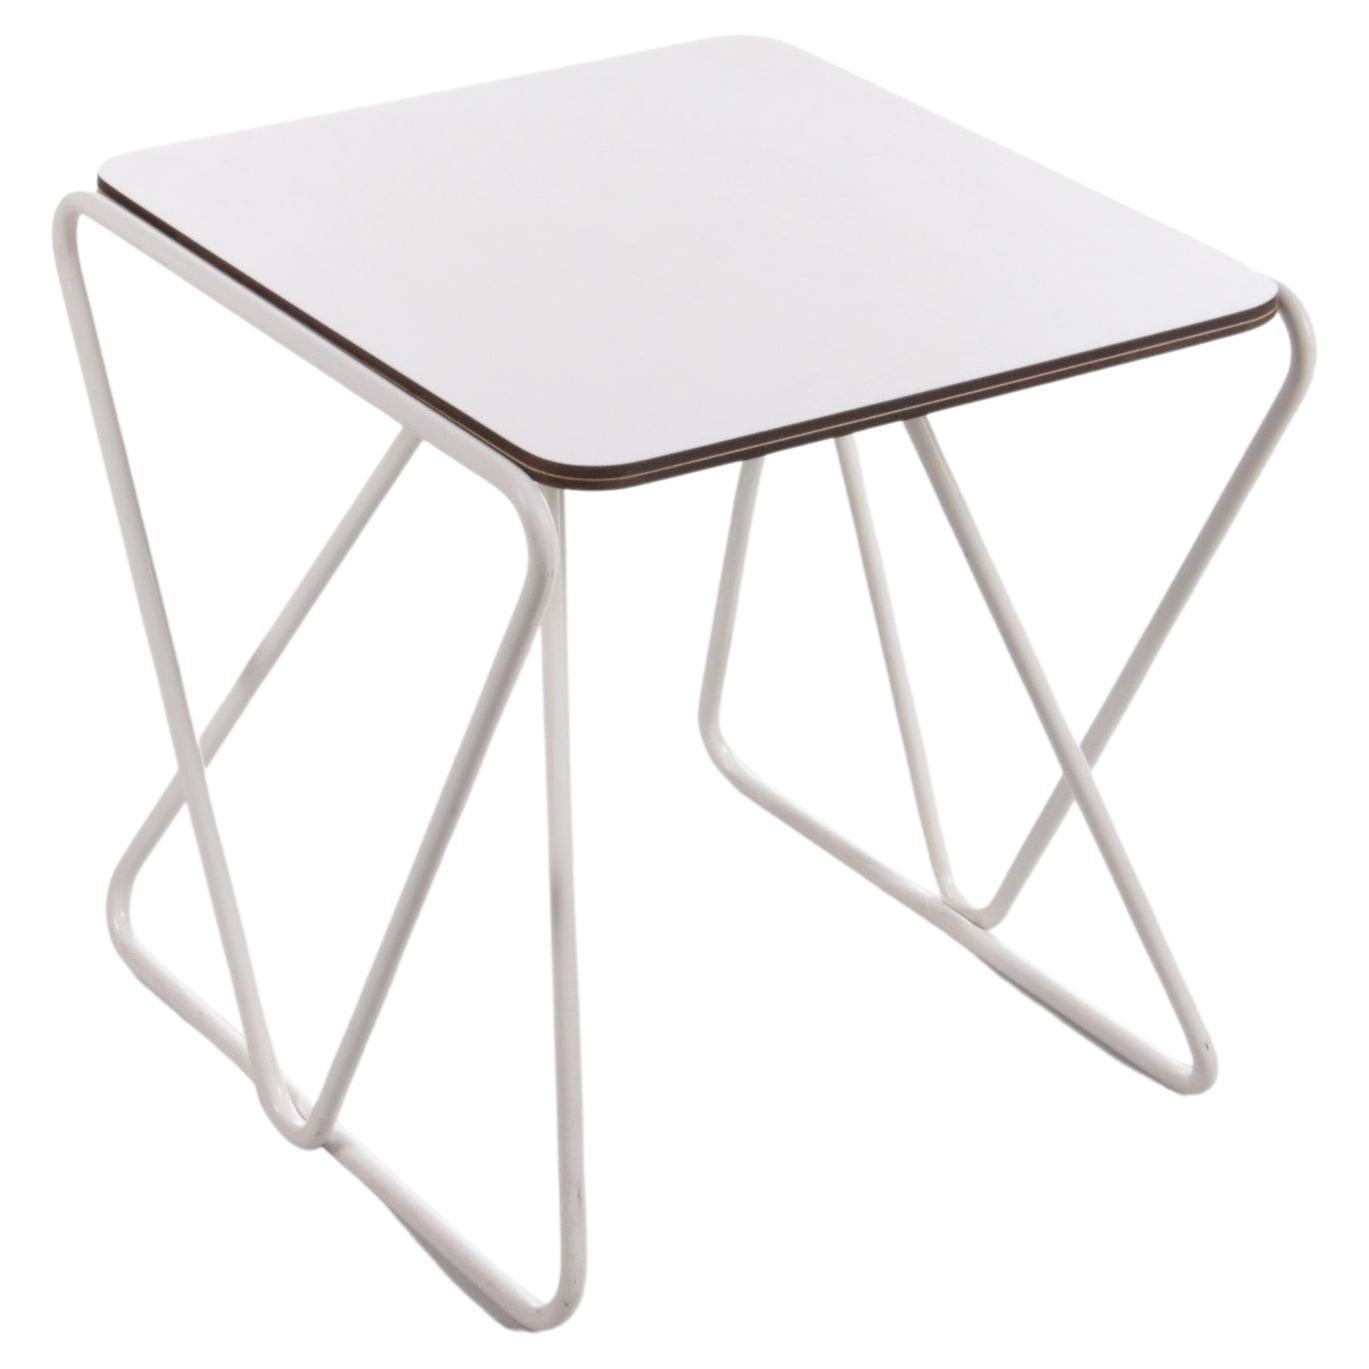 Walter Antonis Side Table for I-Form Holland, 1978 For Sale